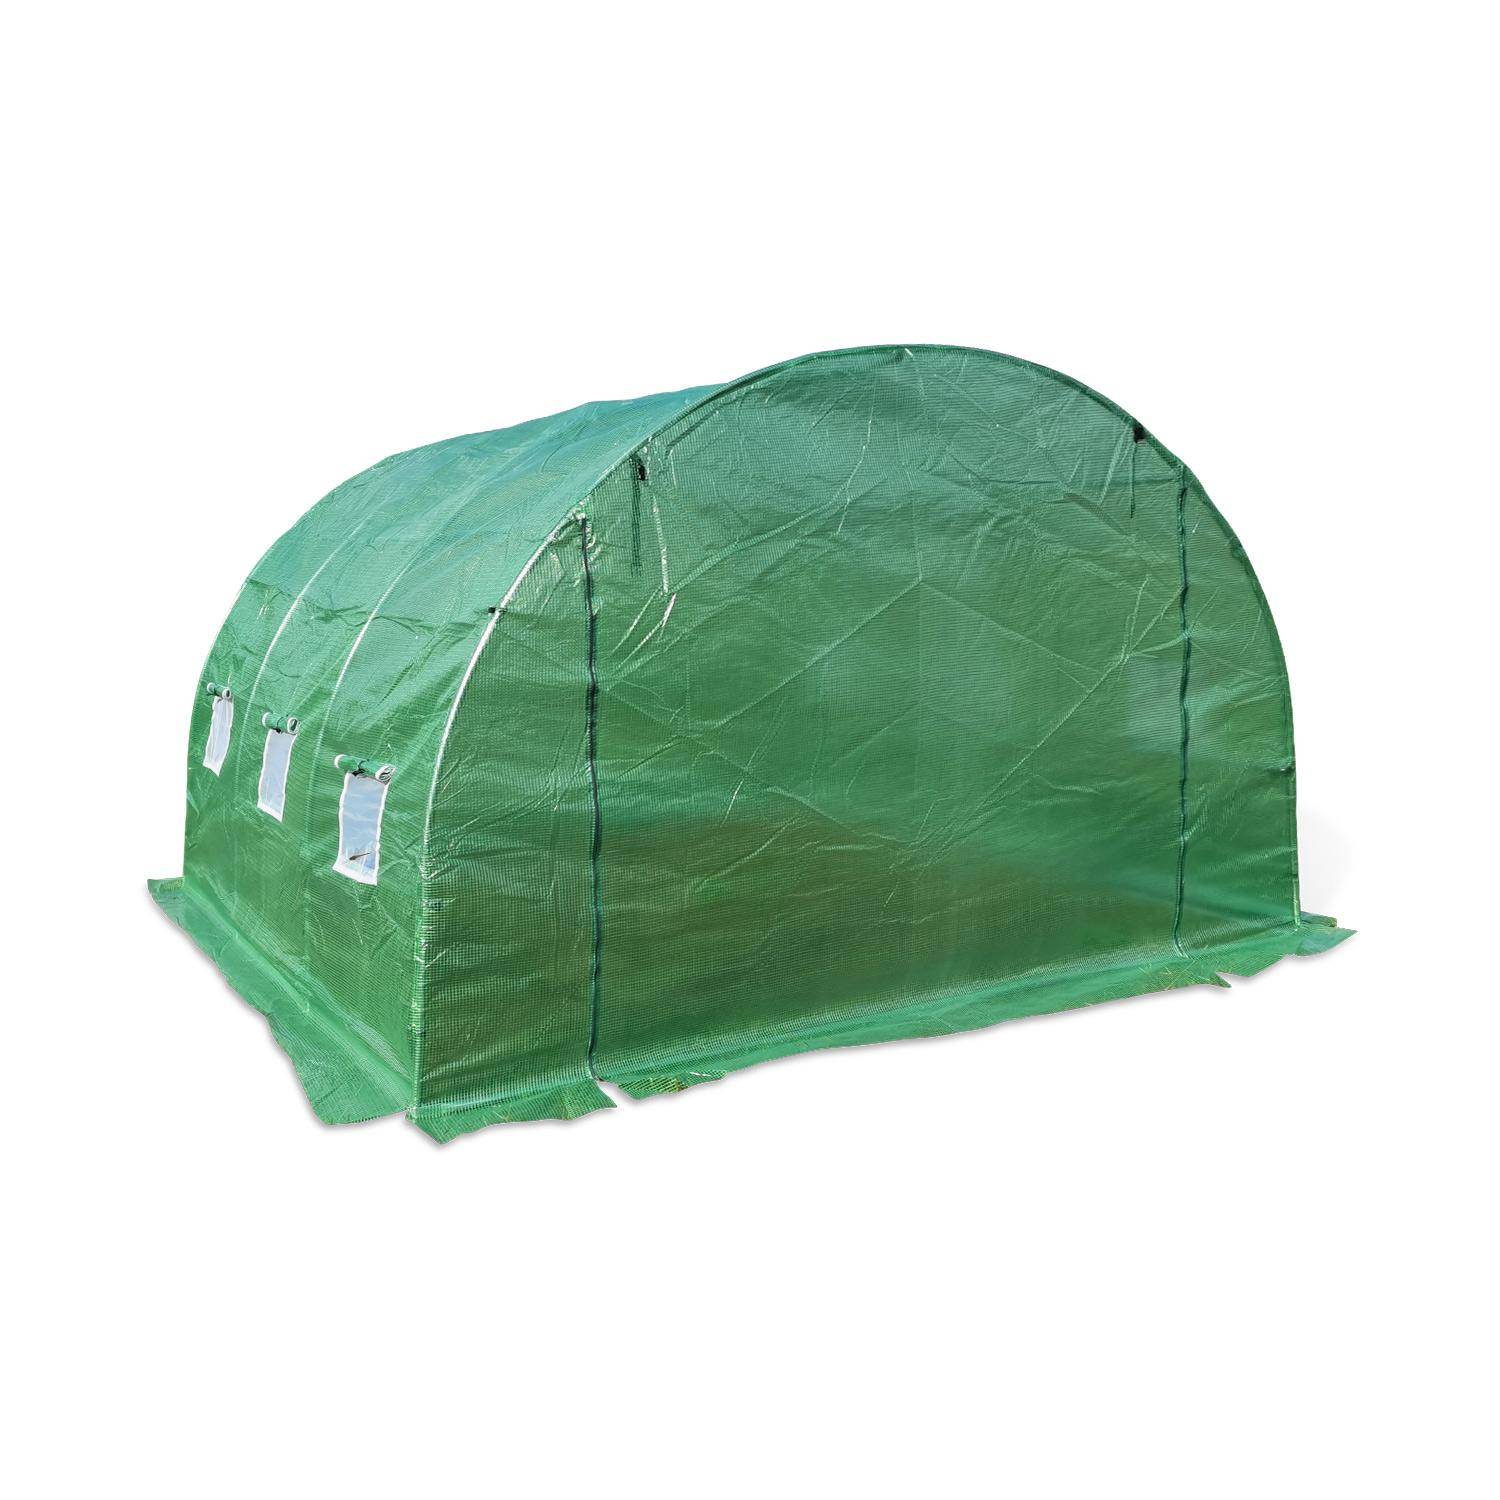 Replacement greenhouse cover - 9 sq metres - Romarin - Green  Photo2